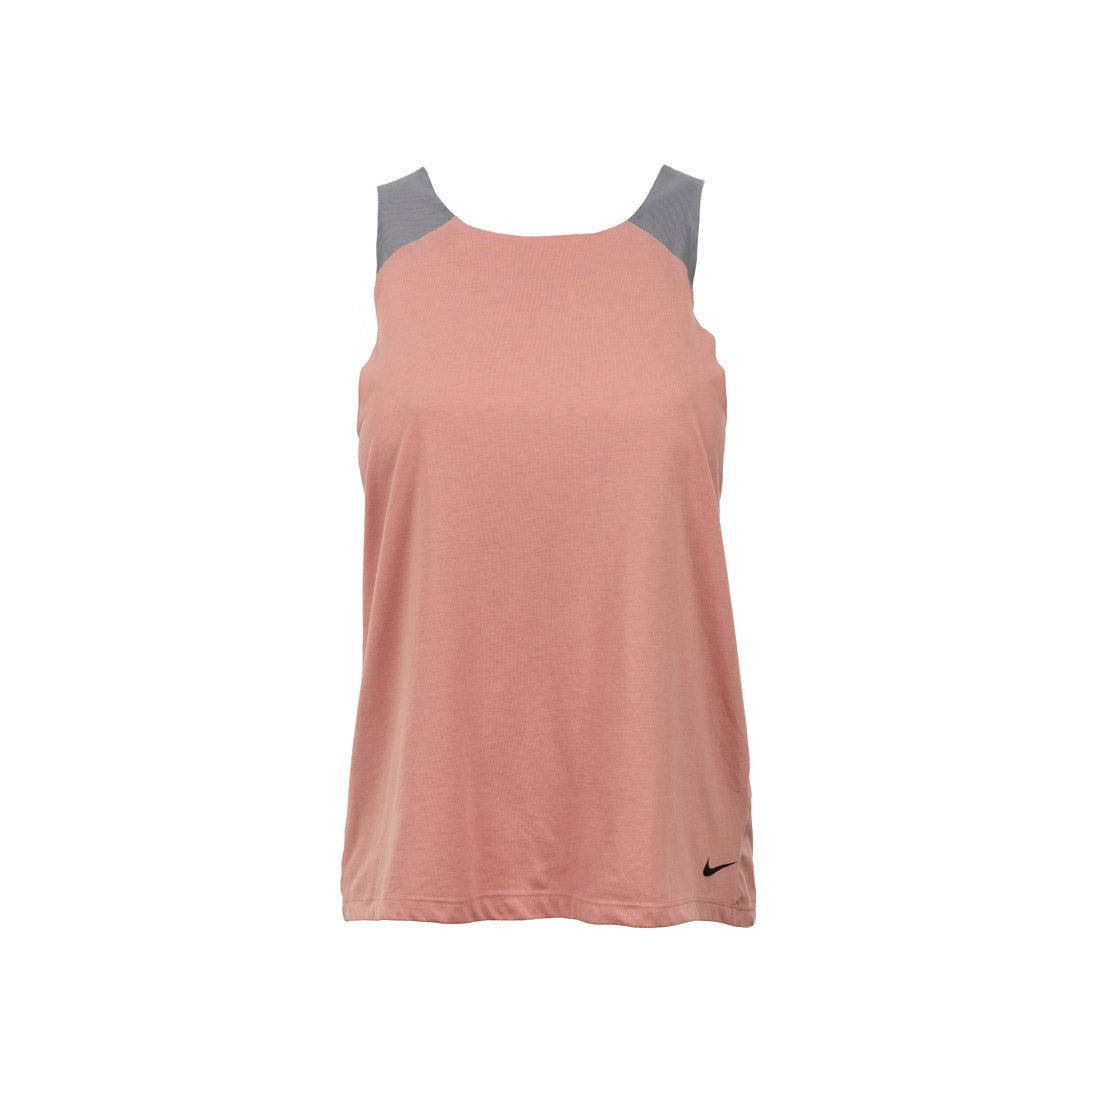 Nike Sports Top - mymadstore.com